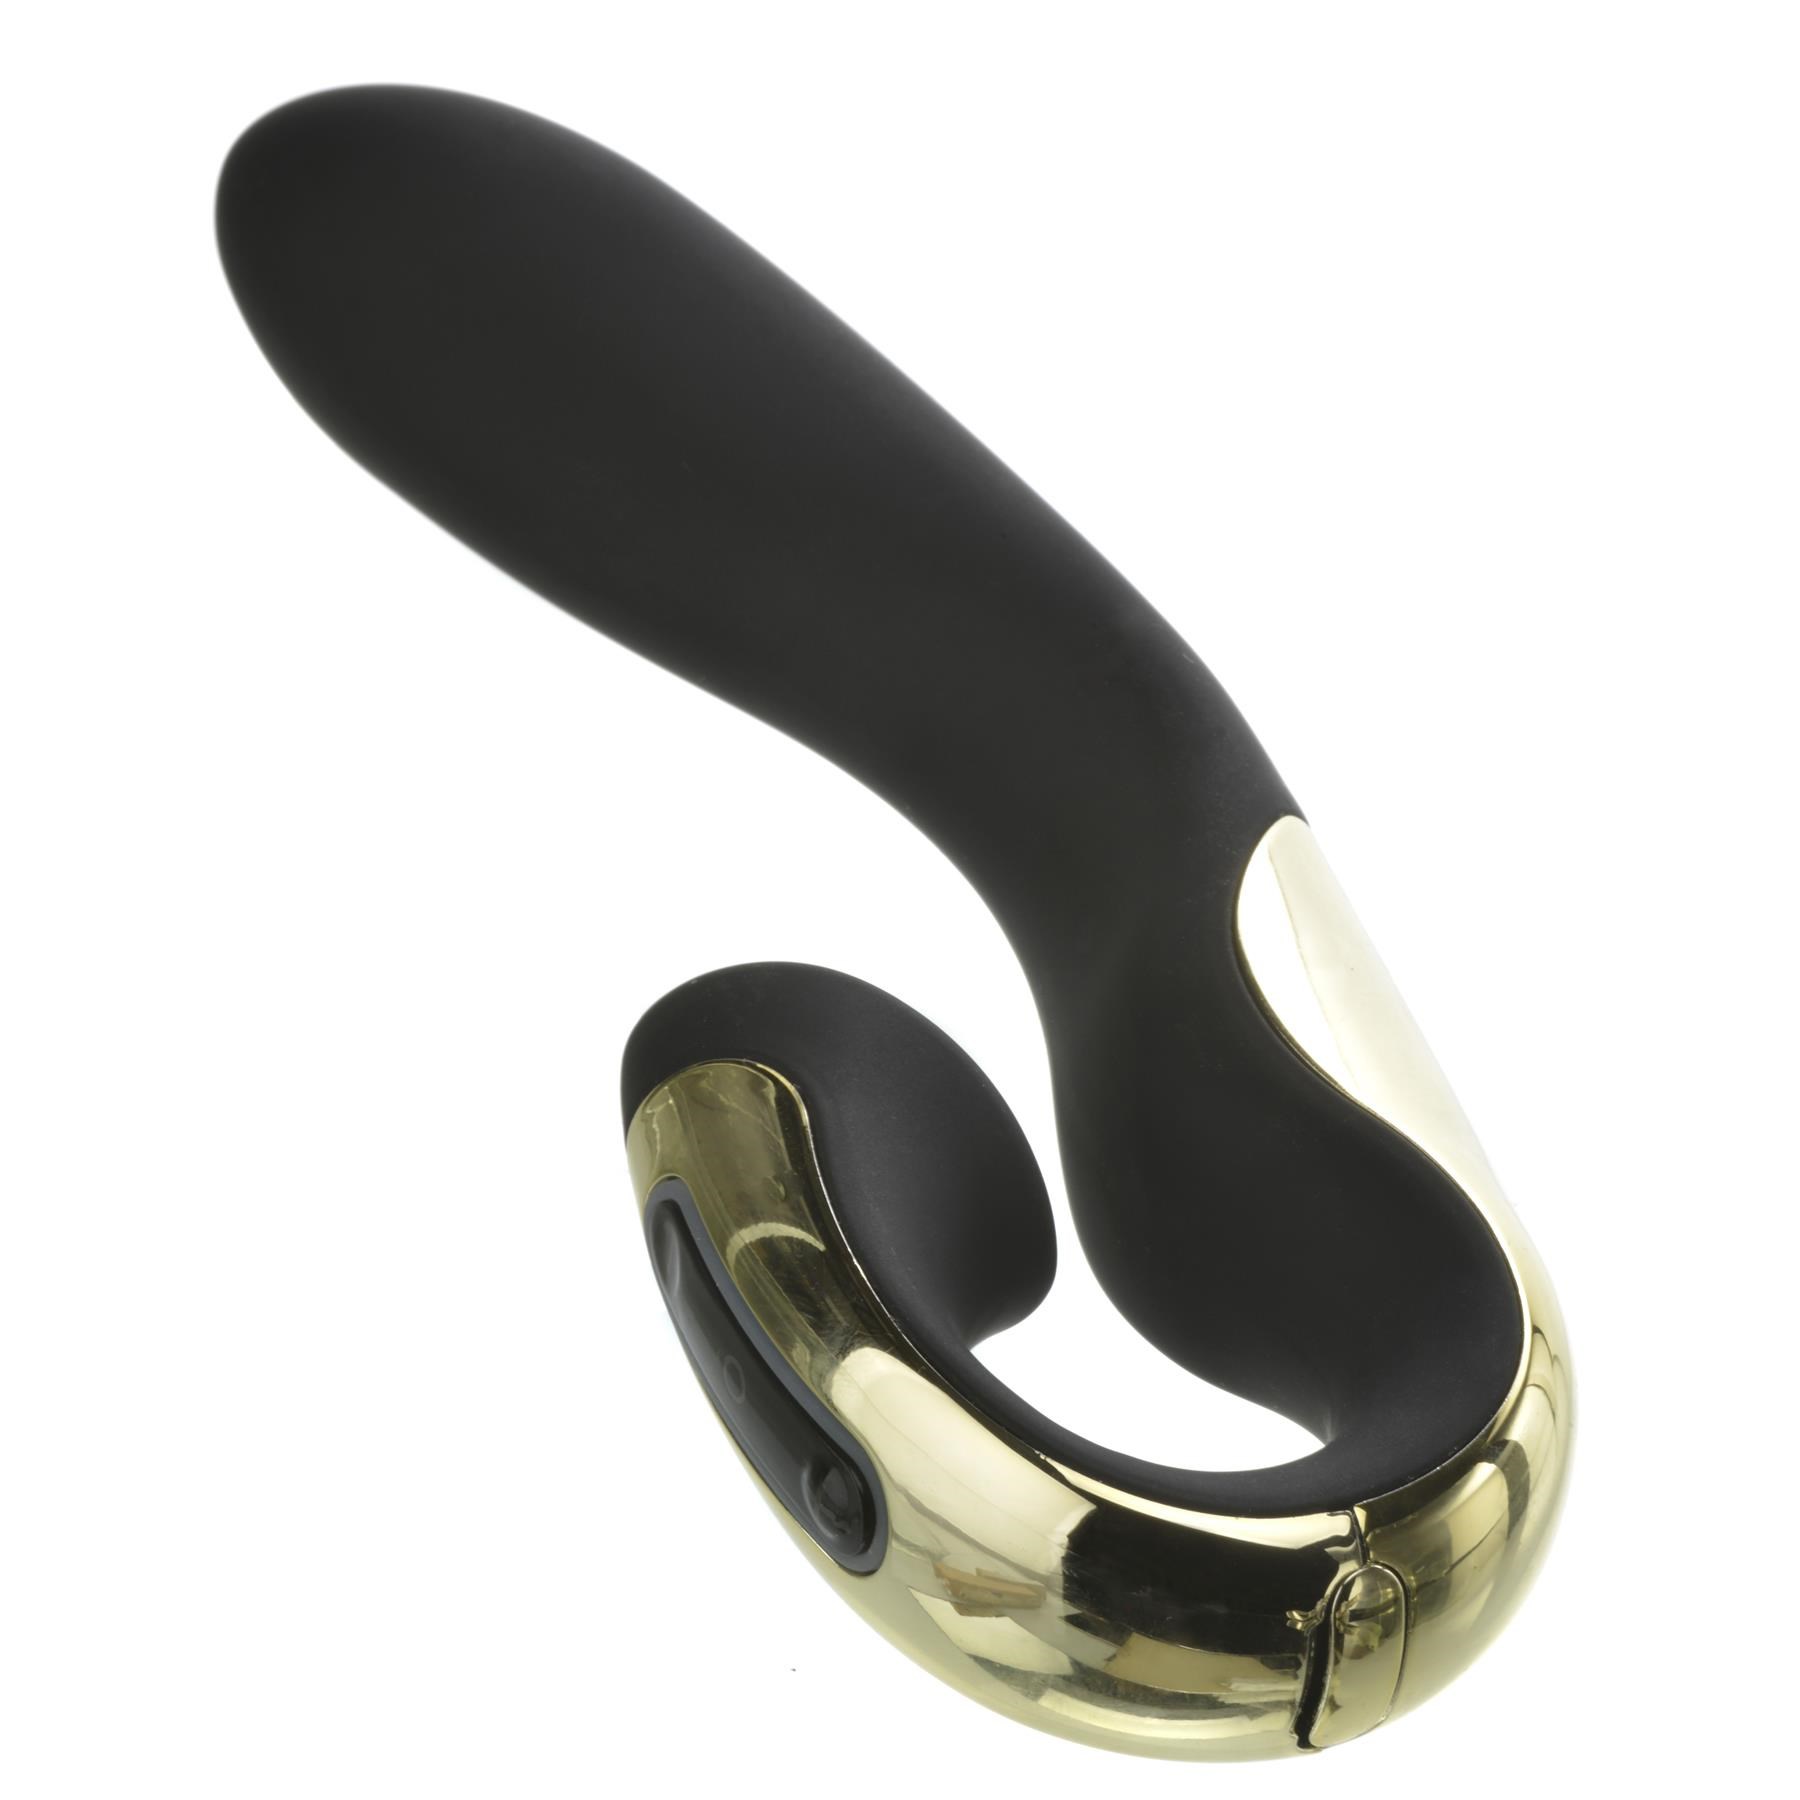 Zini Roae Special Edition Dual Massager - Product Shot